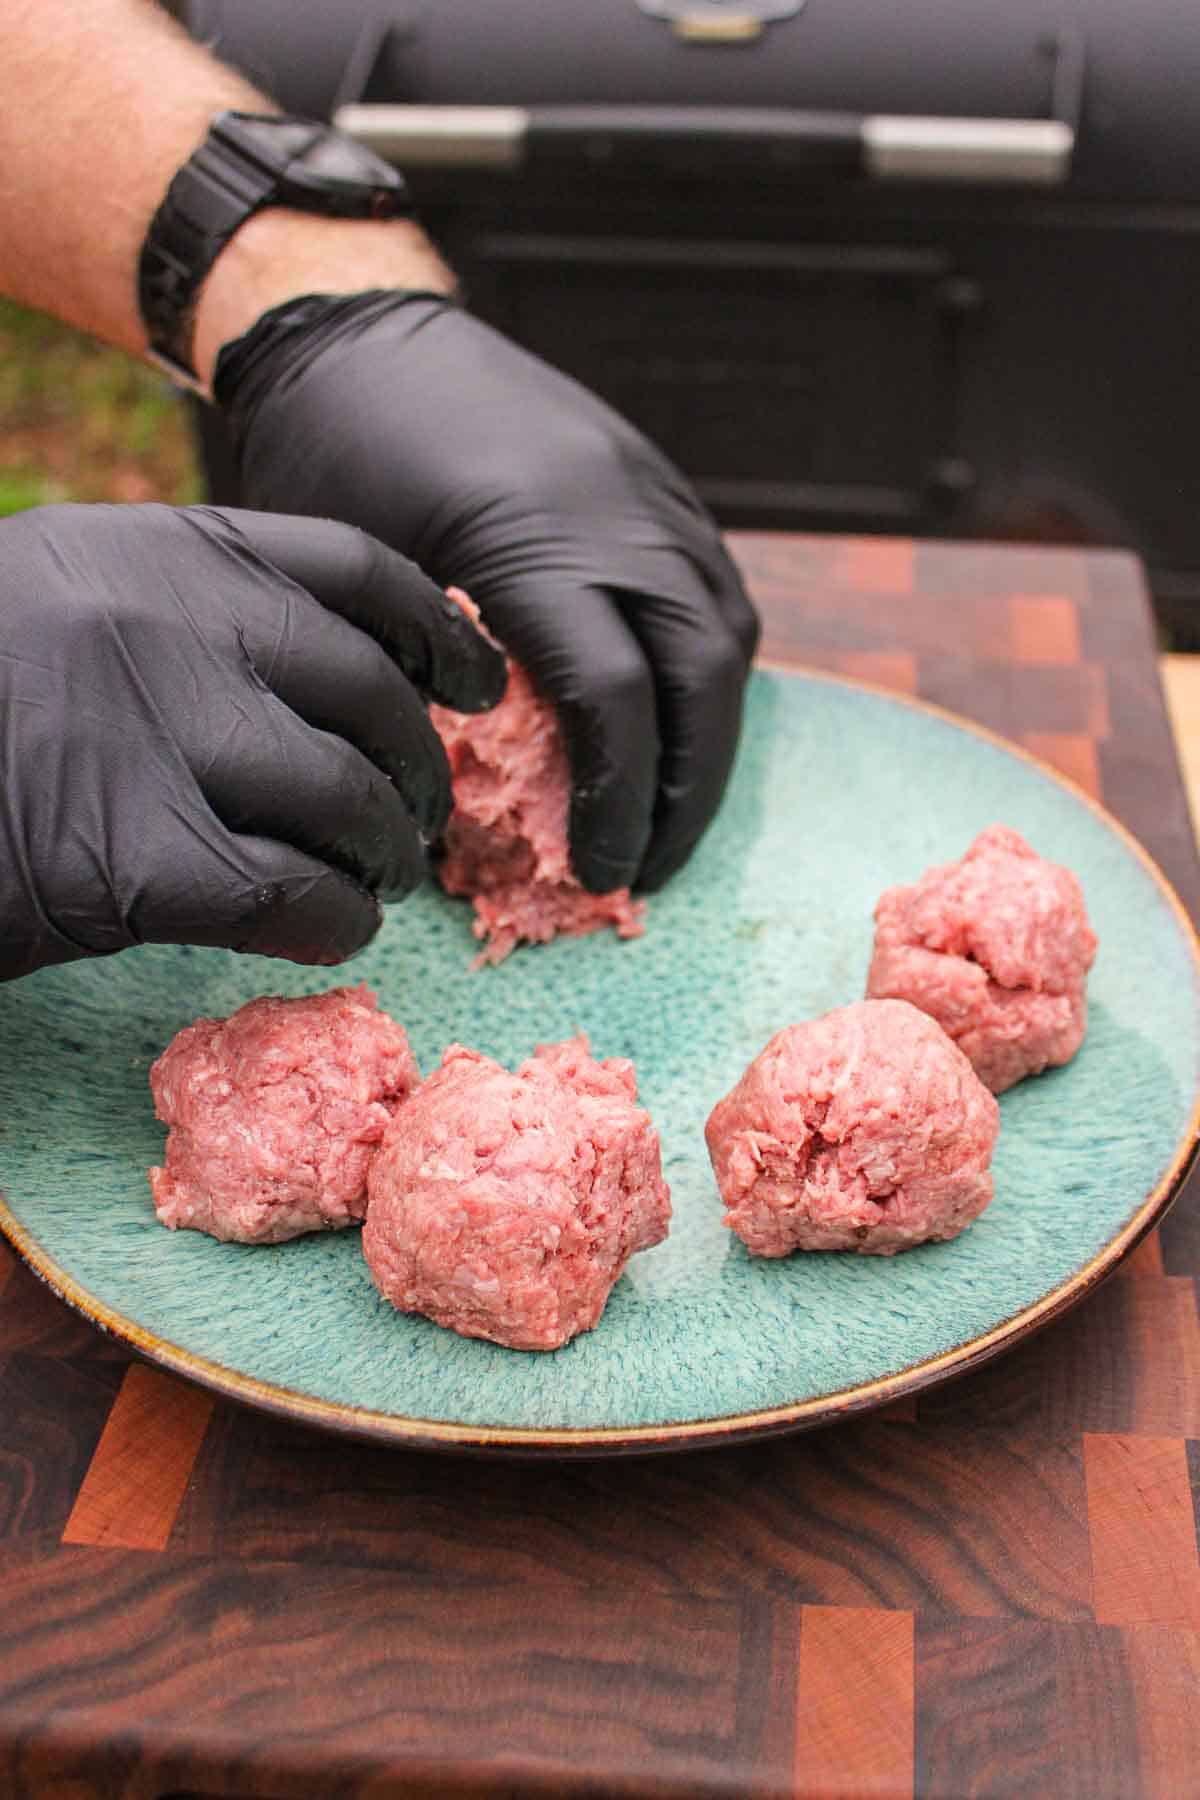 Forming the ground beef into small, round balls.